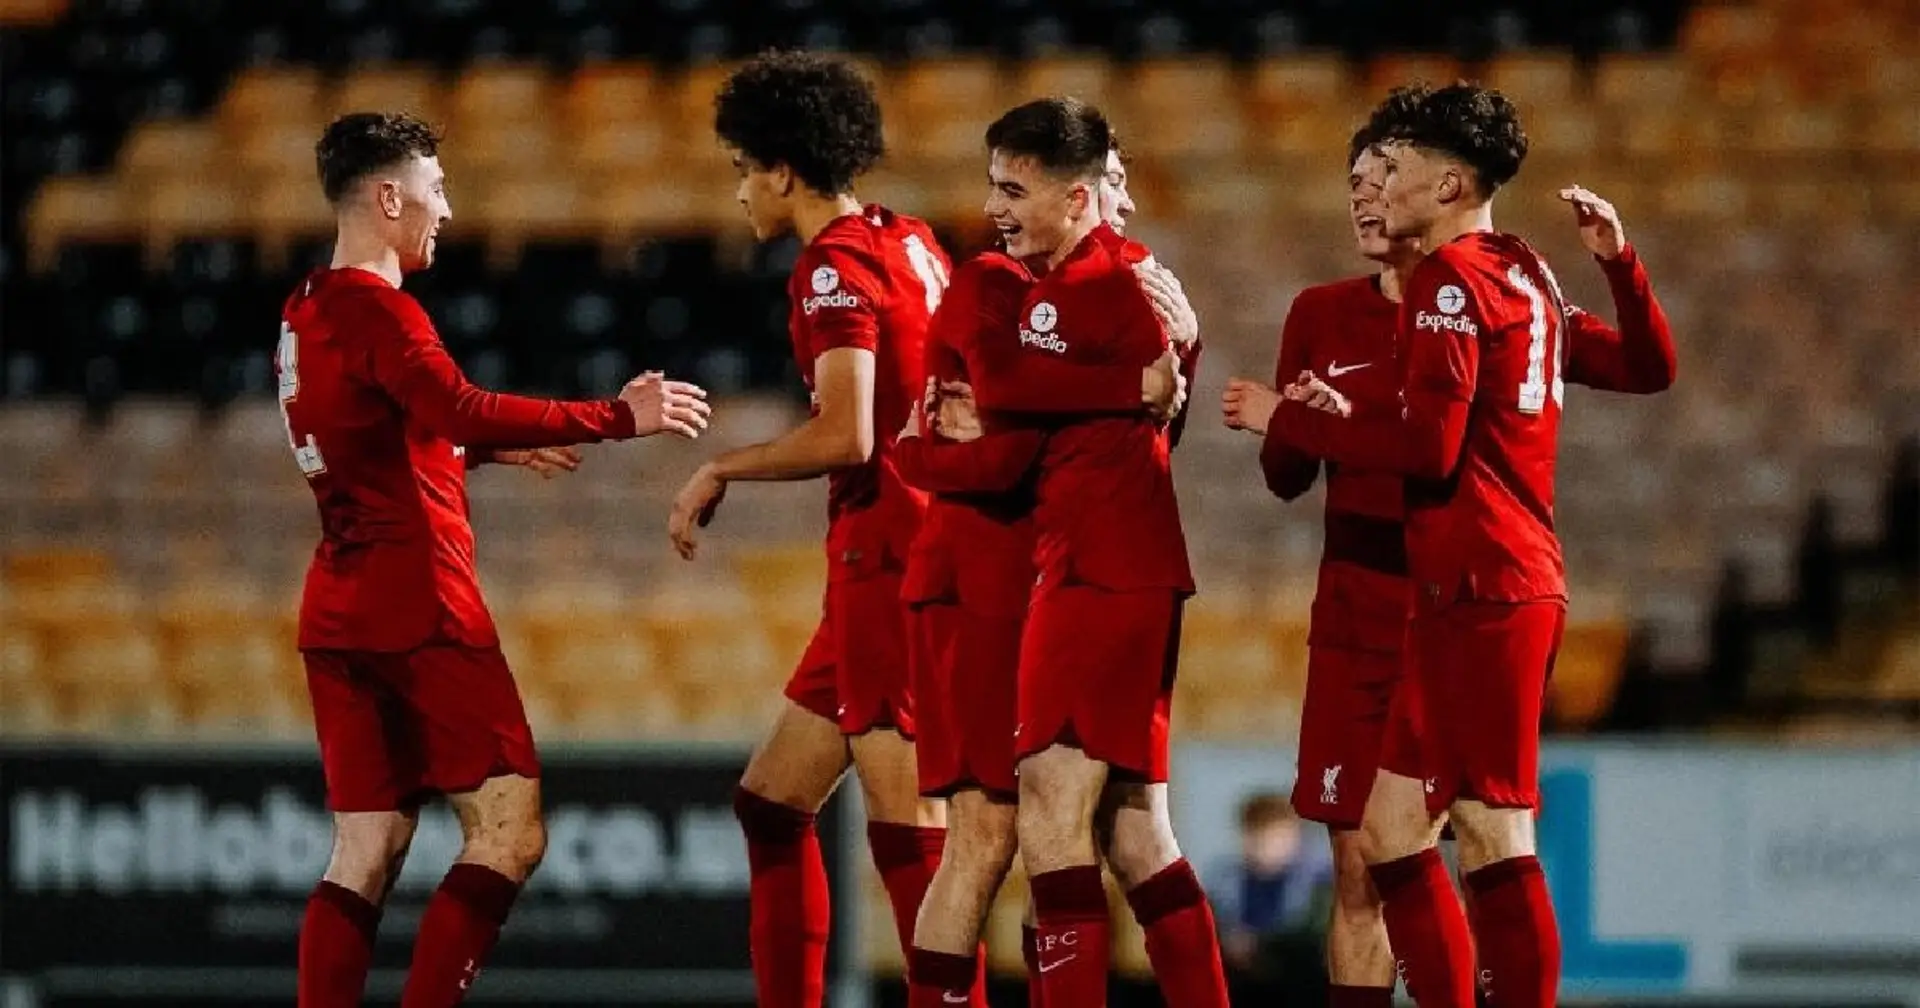 Koumetio scores from inside his own half as Liverpool U21s and U18s get wins over PSG and Port Vale